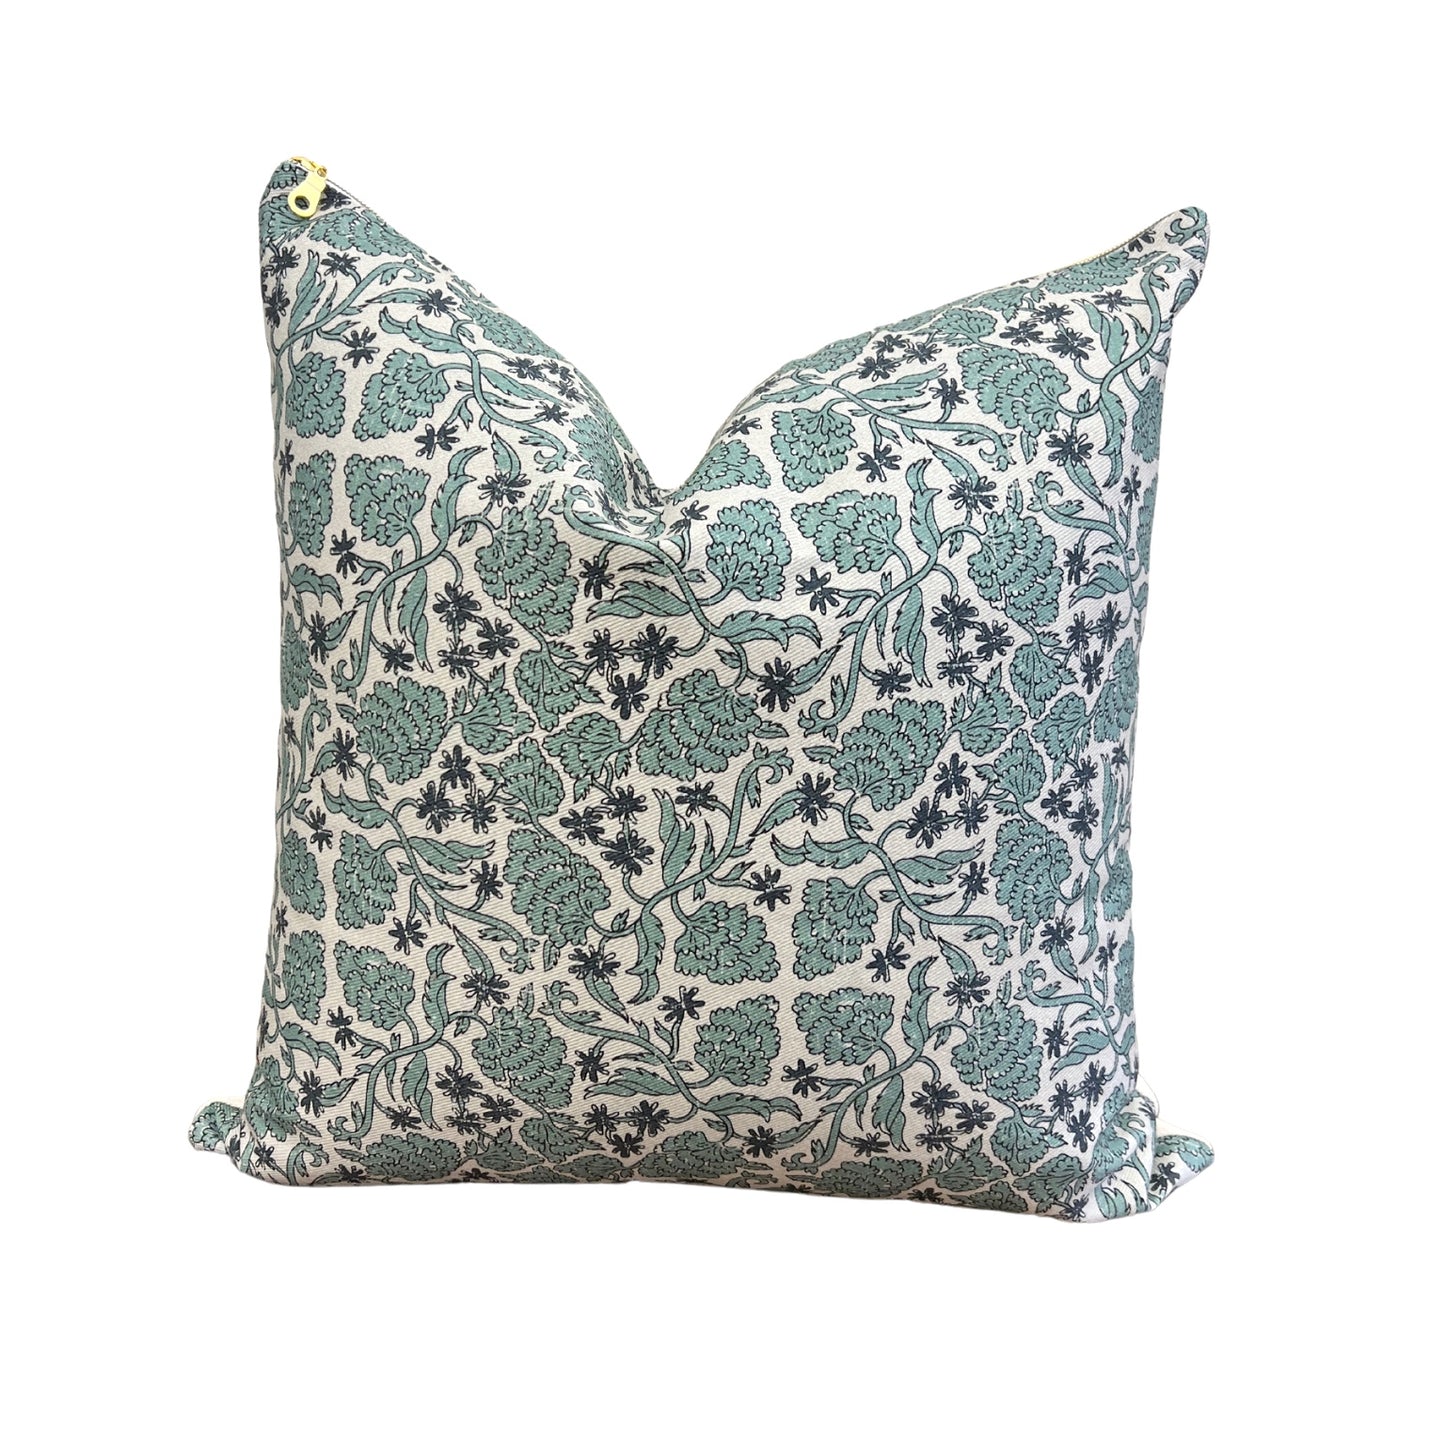 Koko Teal Pillow Cover - Designed by Holli Zollinger